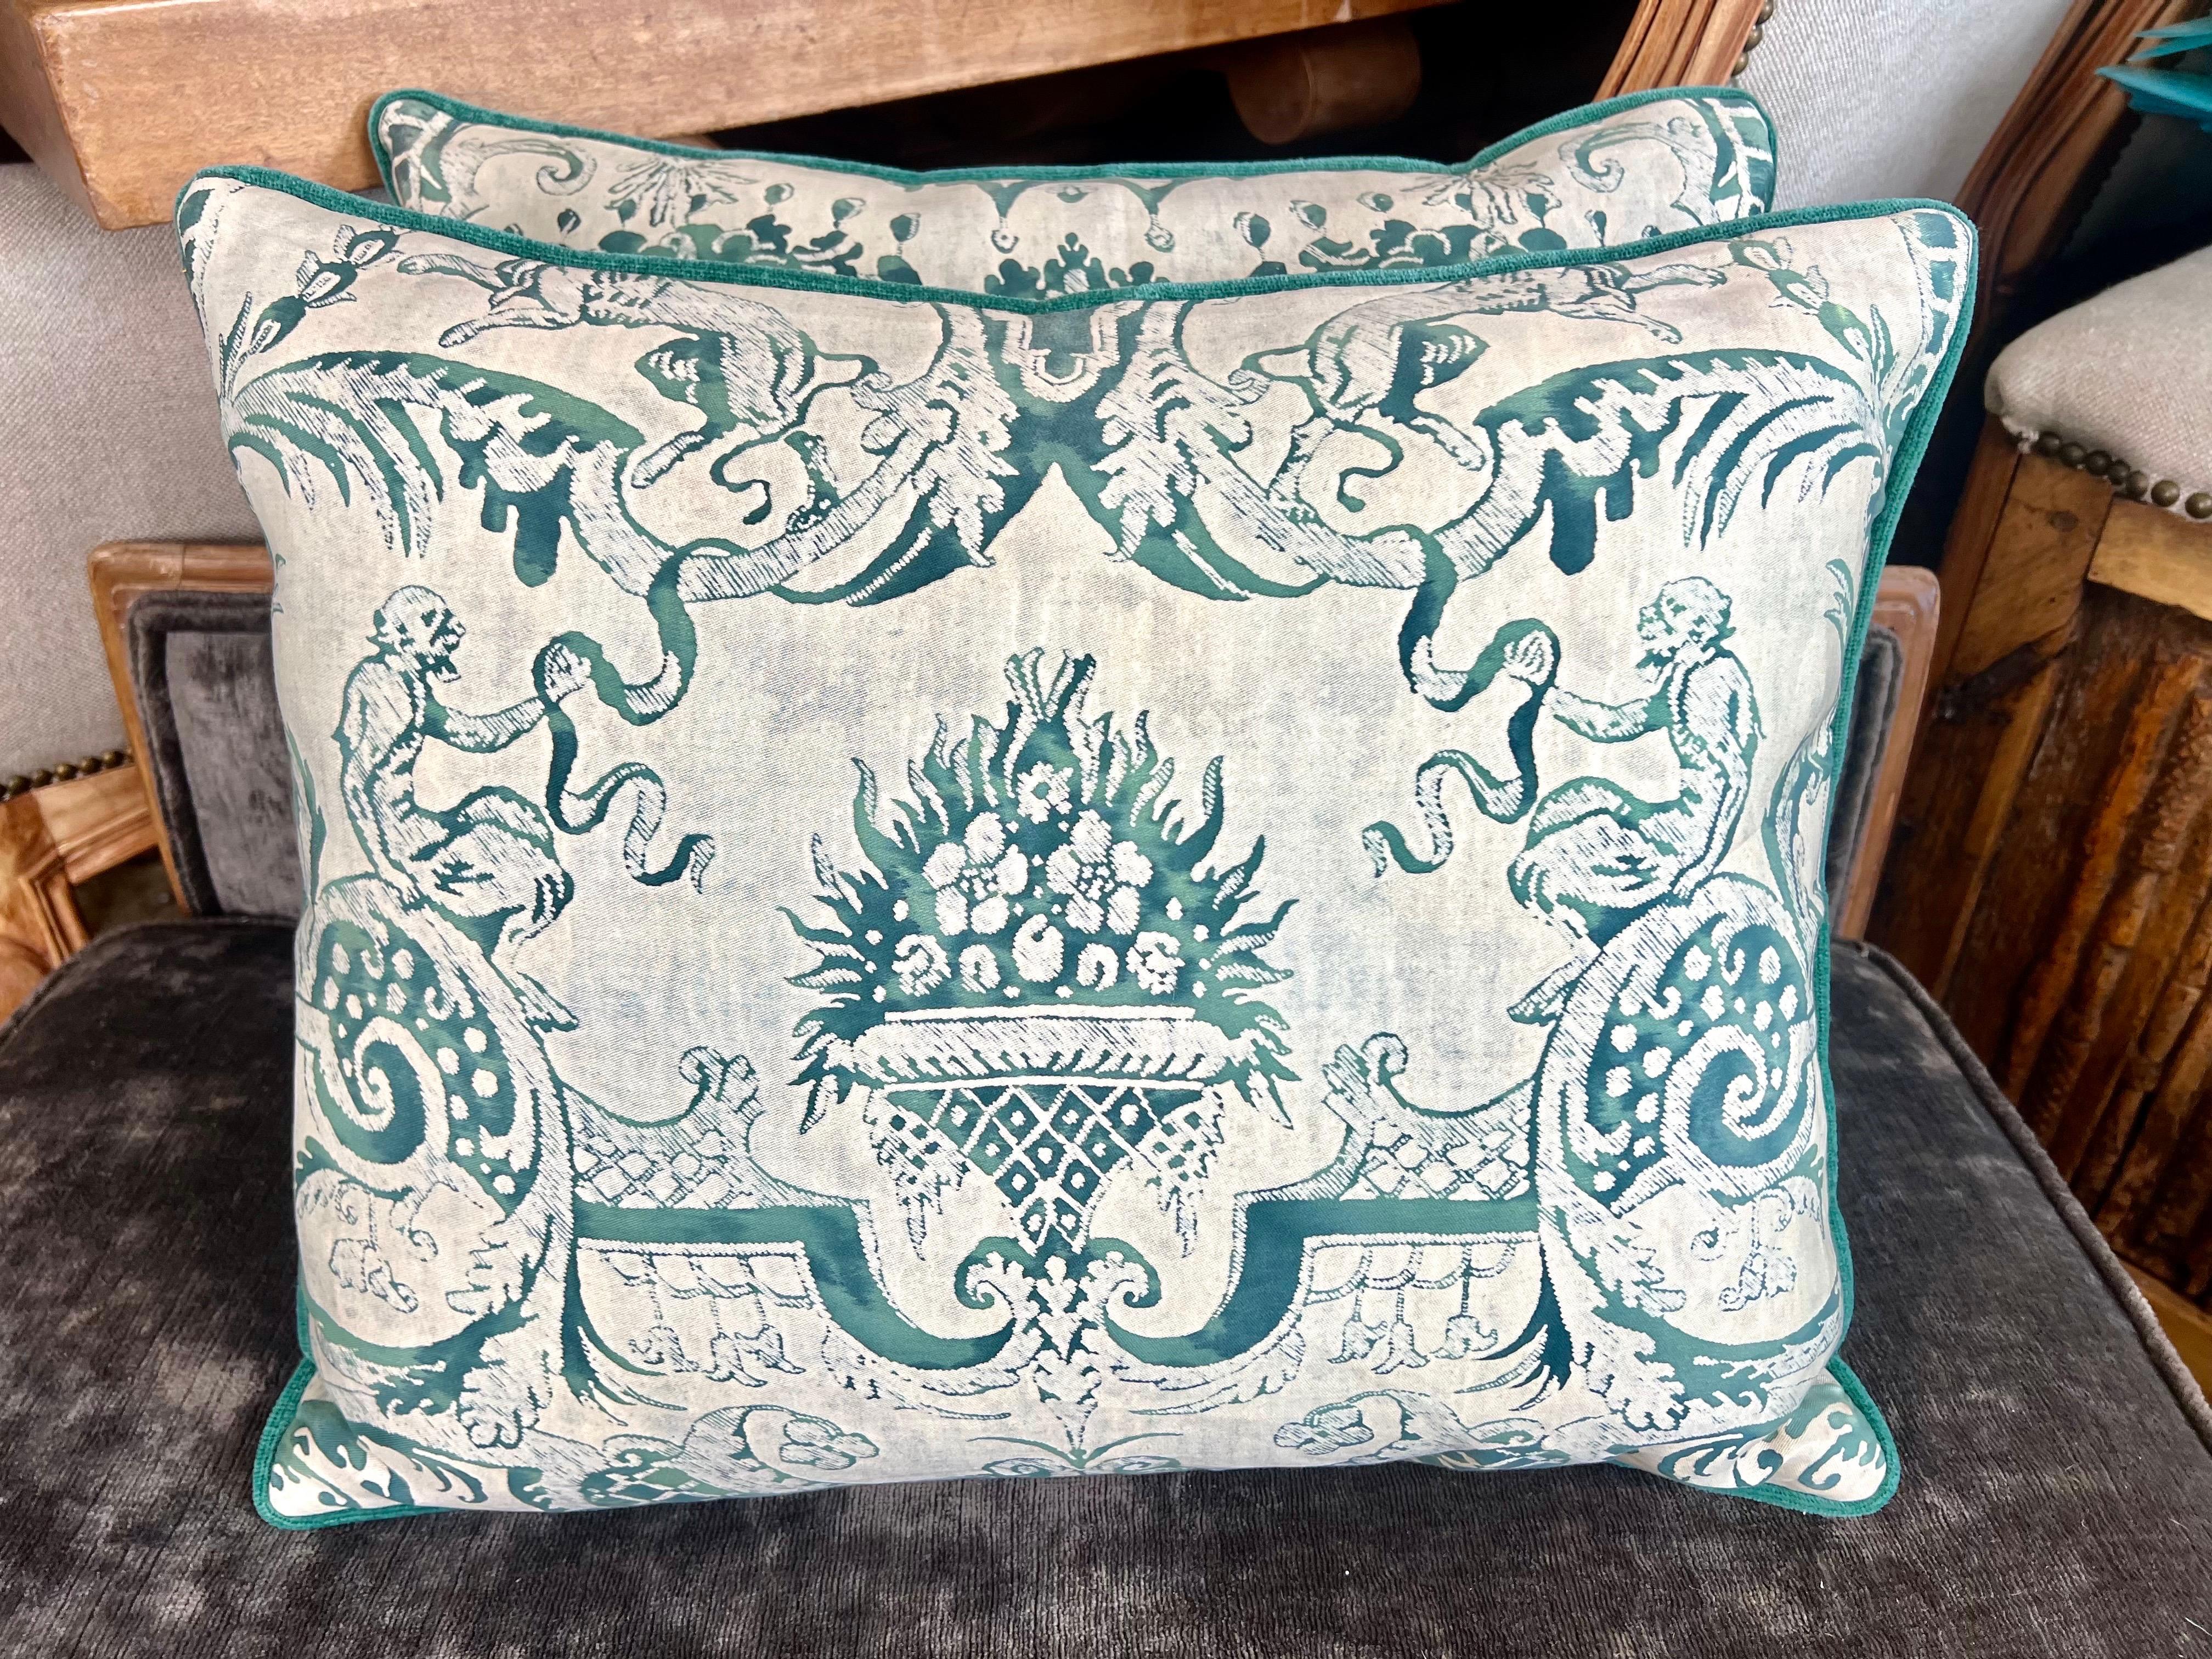 20th Century Pair of Fortuny Manzianno Patterned Pillows in Peacock & Beige For Sale